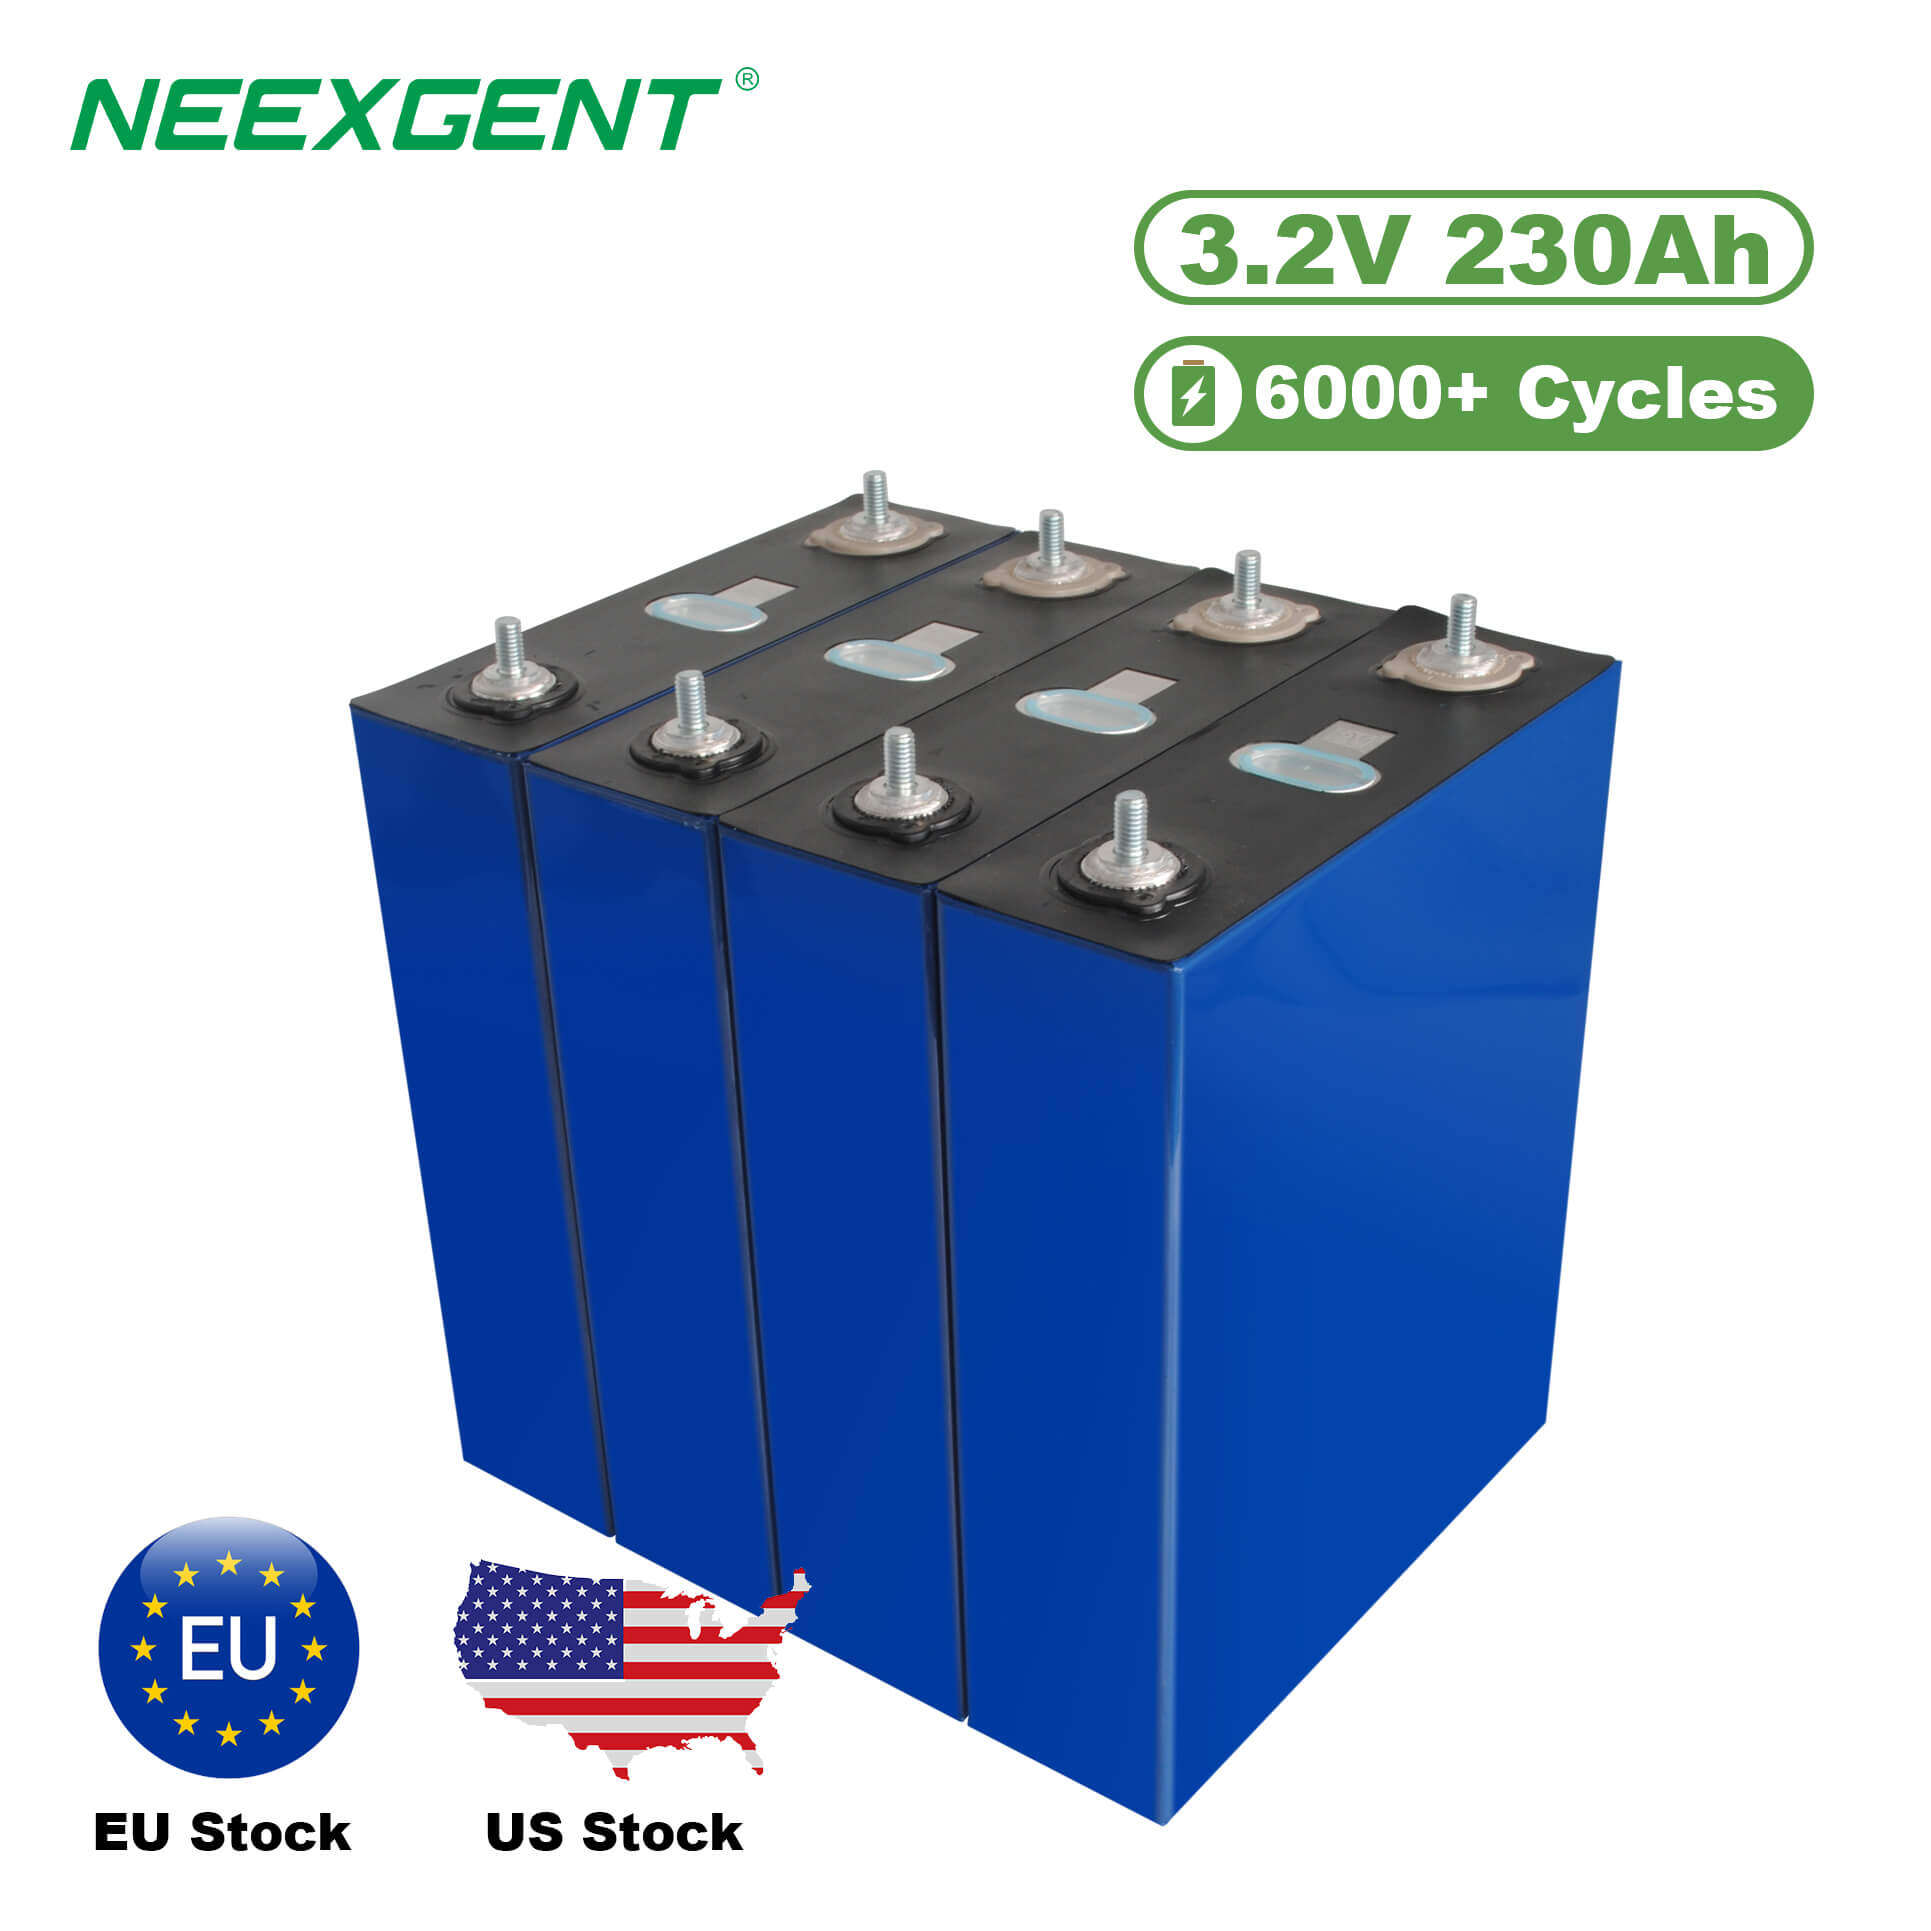 Neexgent 3.2v 230ah Lithium Iron Phosphate Battery Cell Lifepo4 Battery For Solar Energy Storage